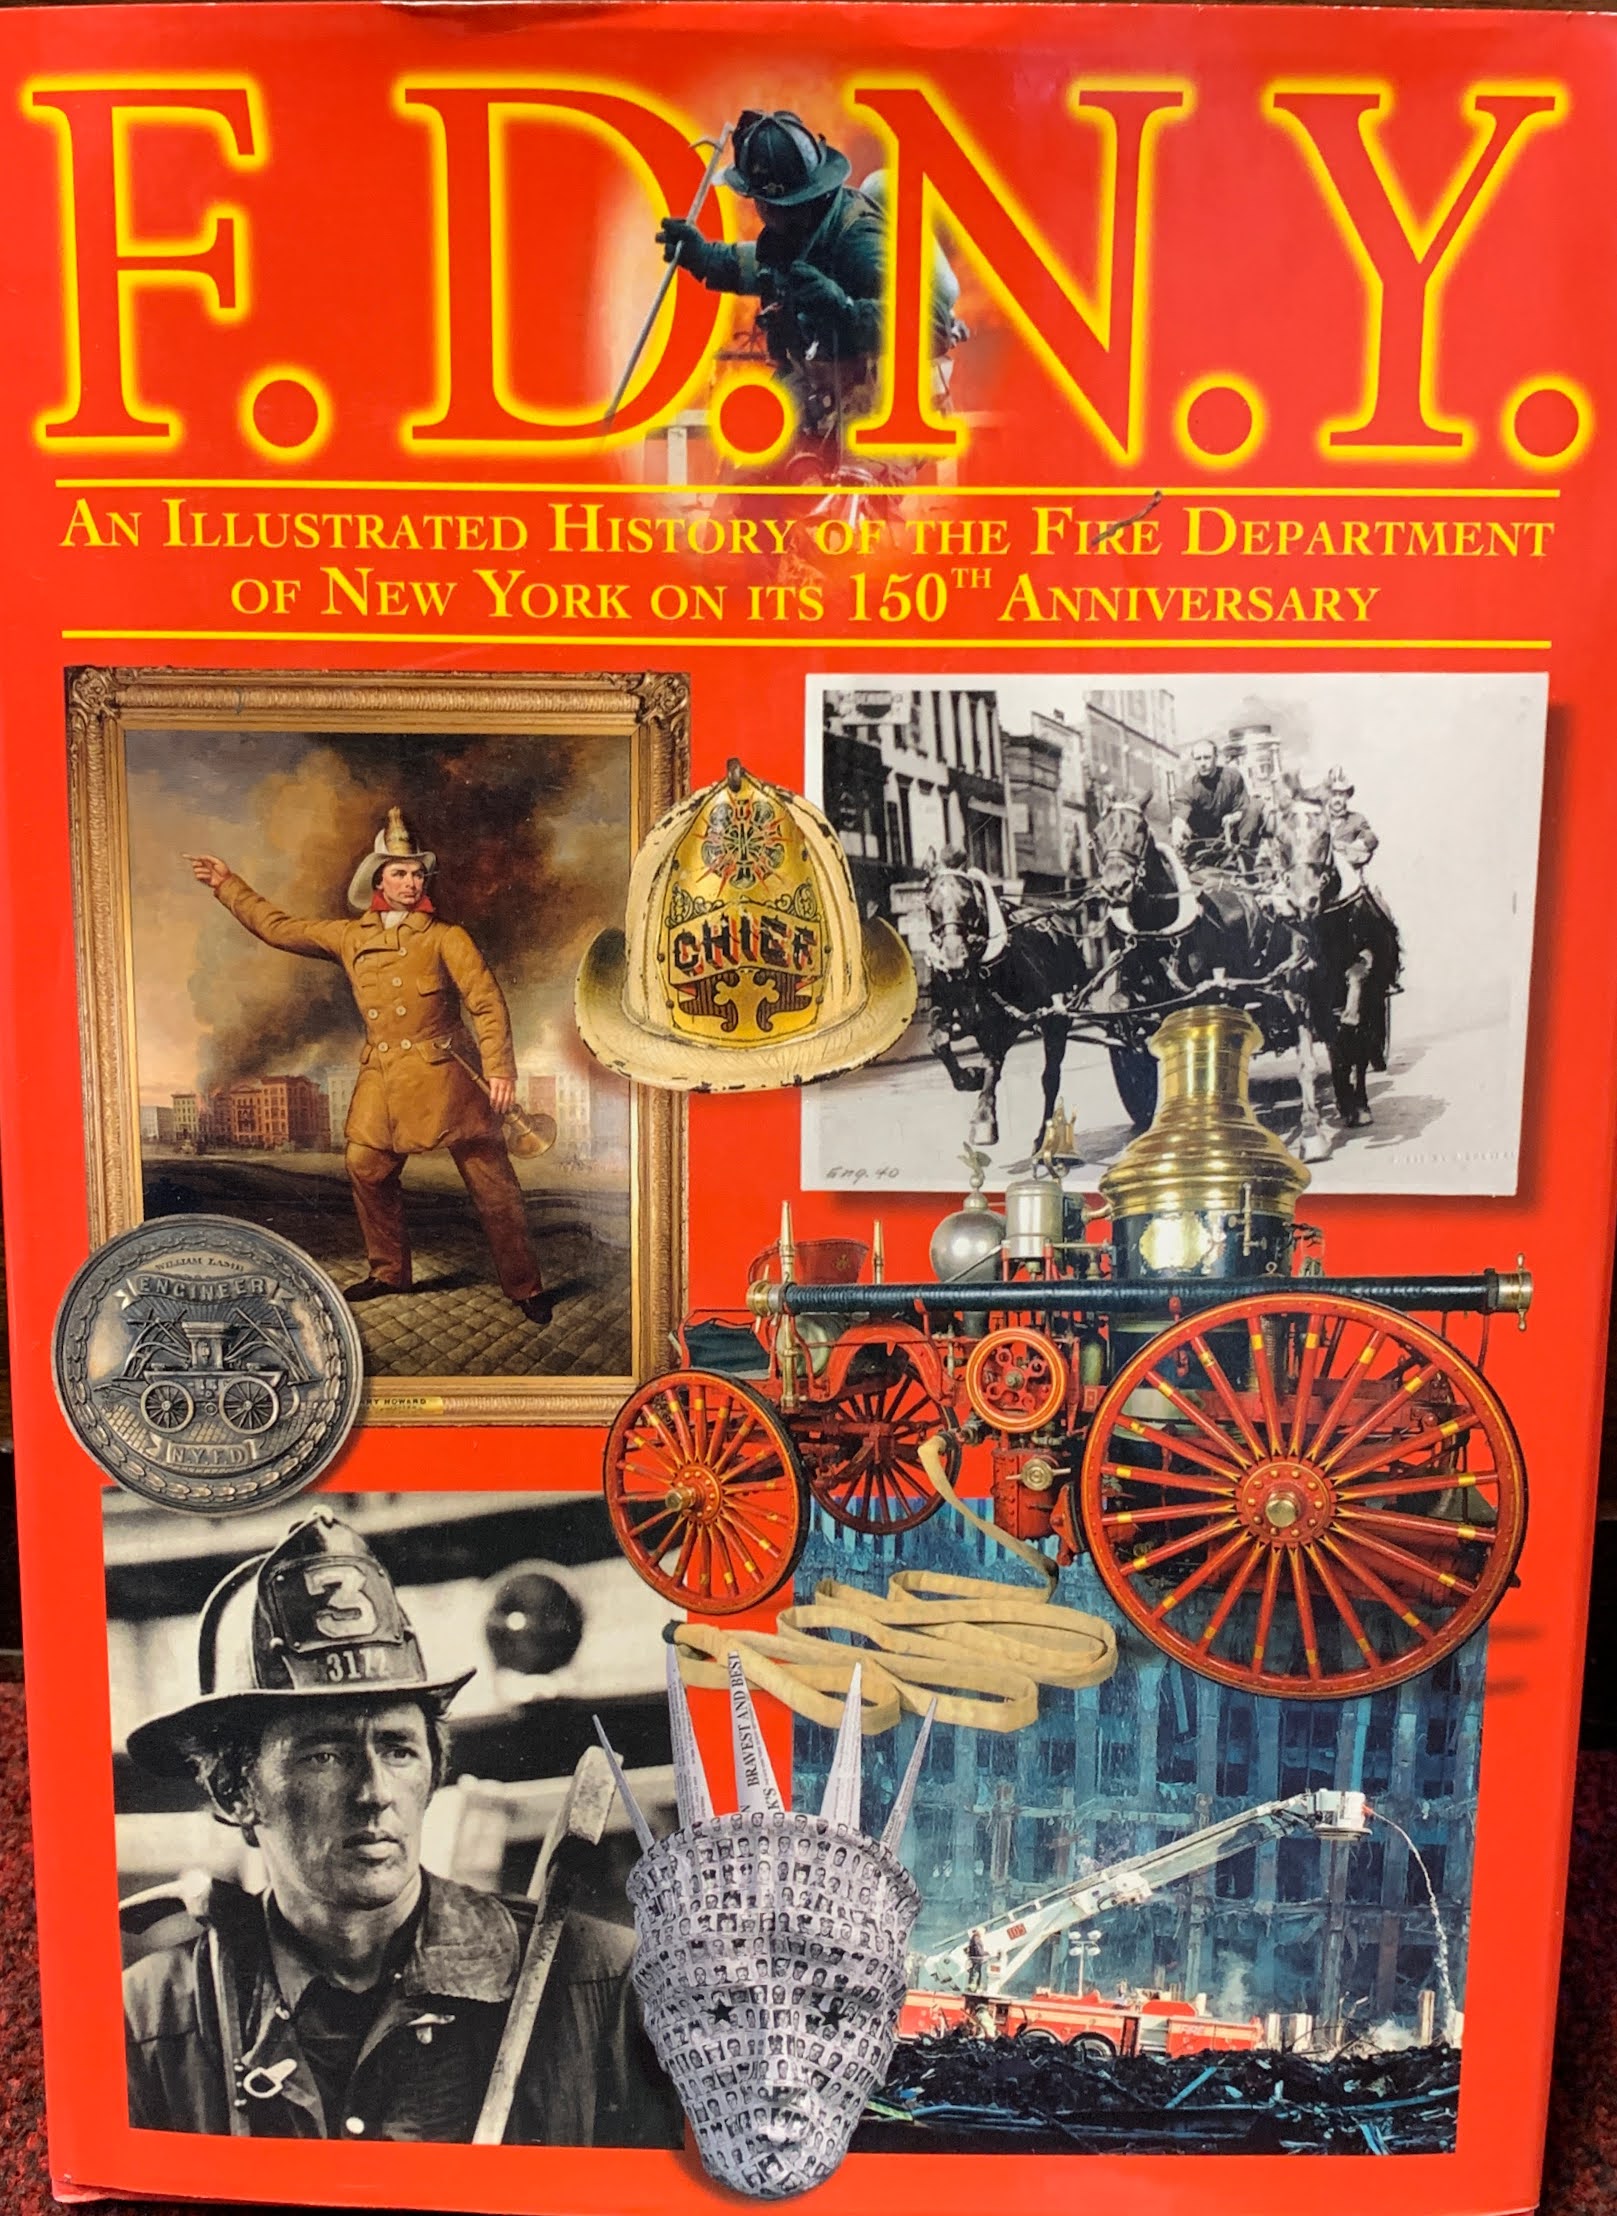 F.D.N.Y. - An Illustrated History, 150 year Anniversary